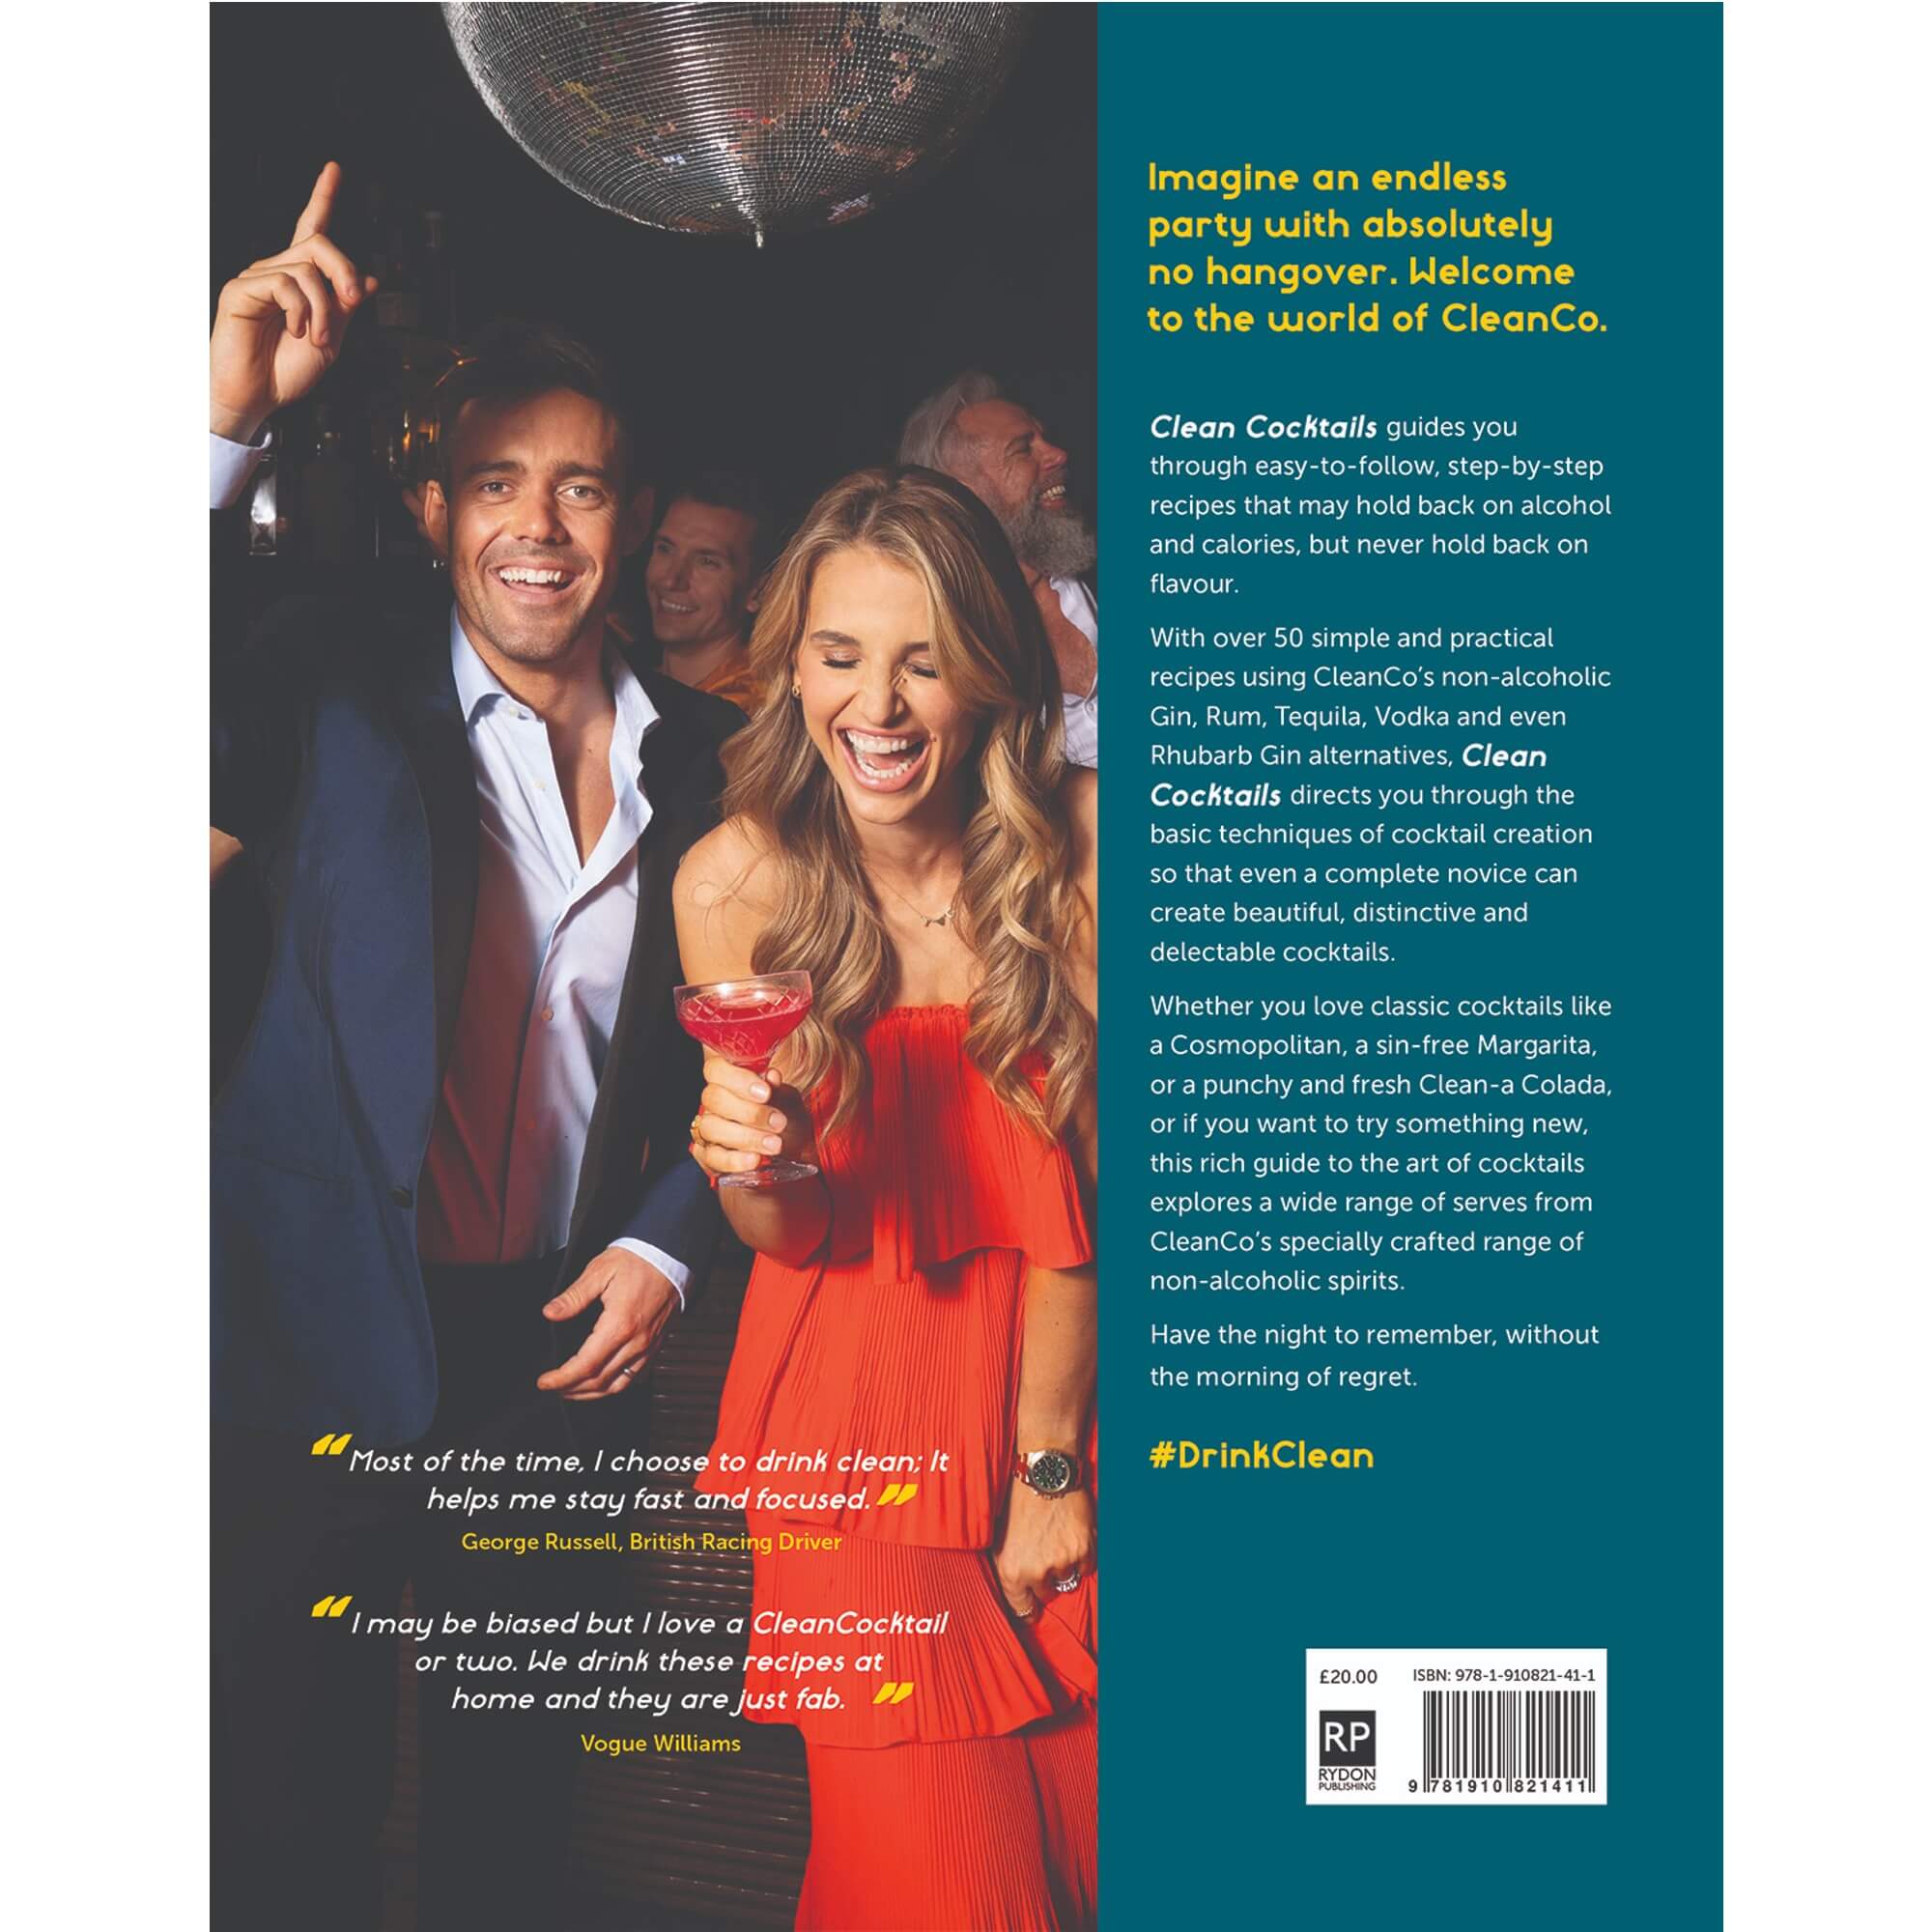 CleanCo Cocktail Book back cover showing Spencer Matthews and Vogue Williams